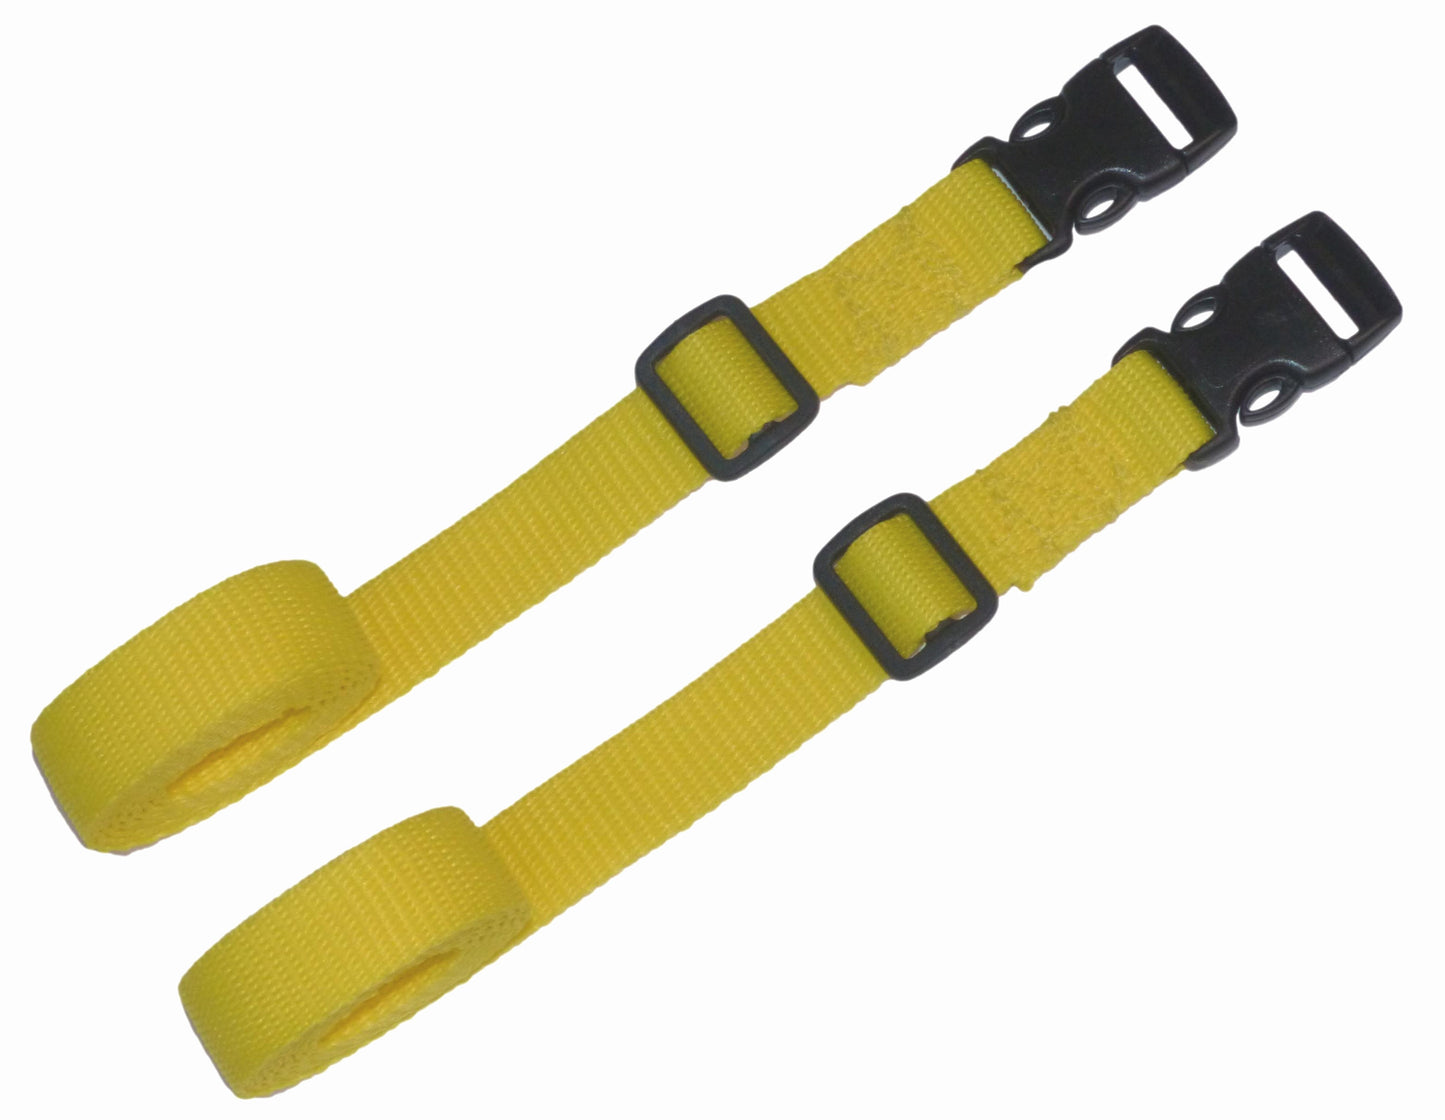 Benristraps 19mm Webbing Strap with Quick Release Buckle (Pair) in yellow